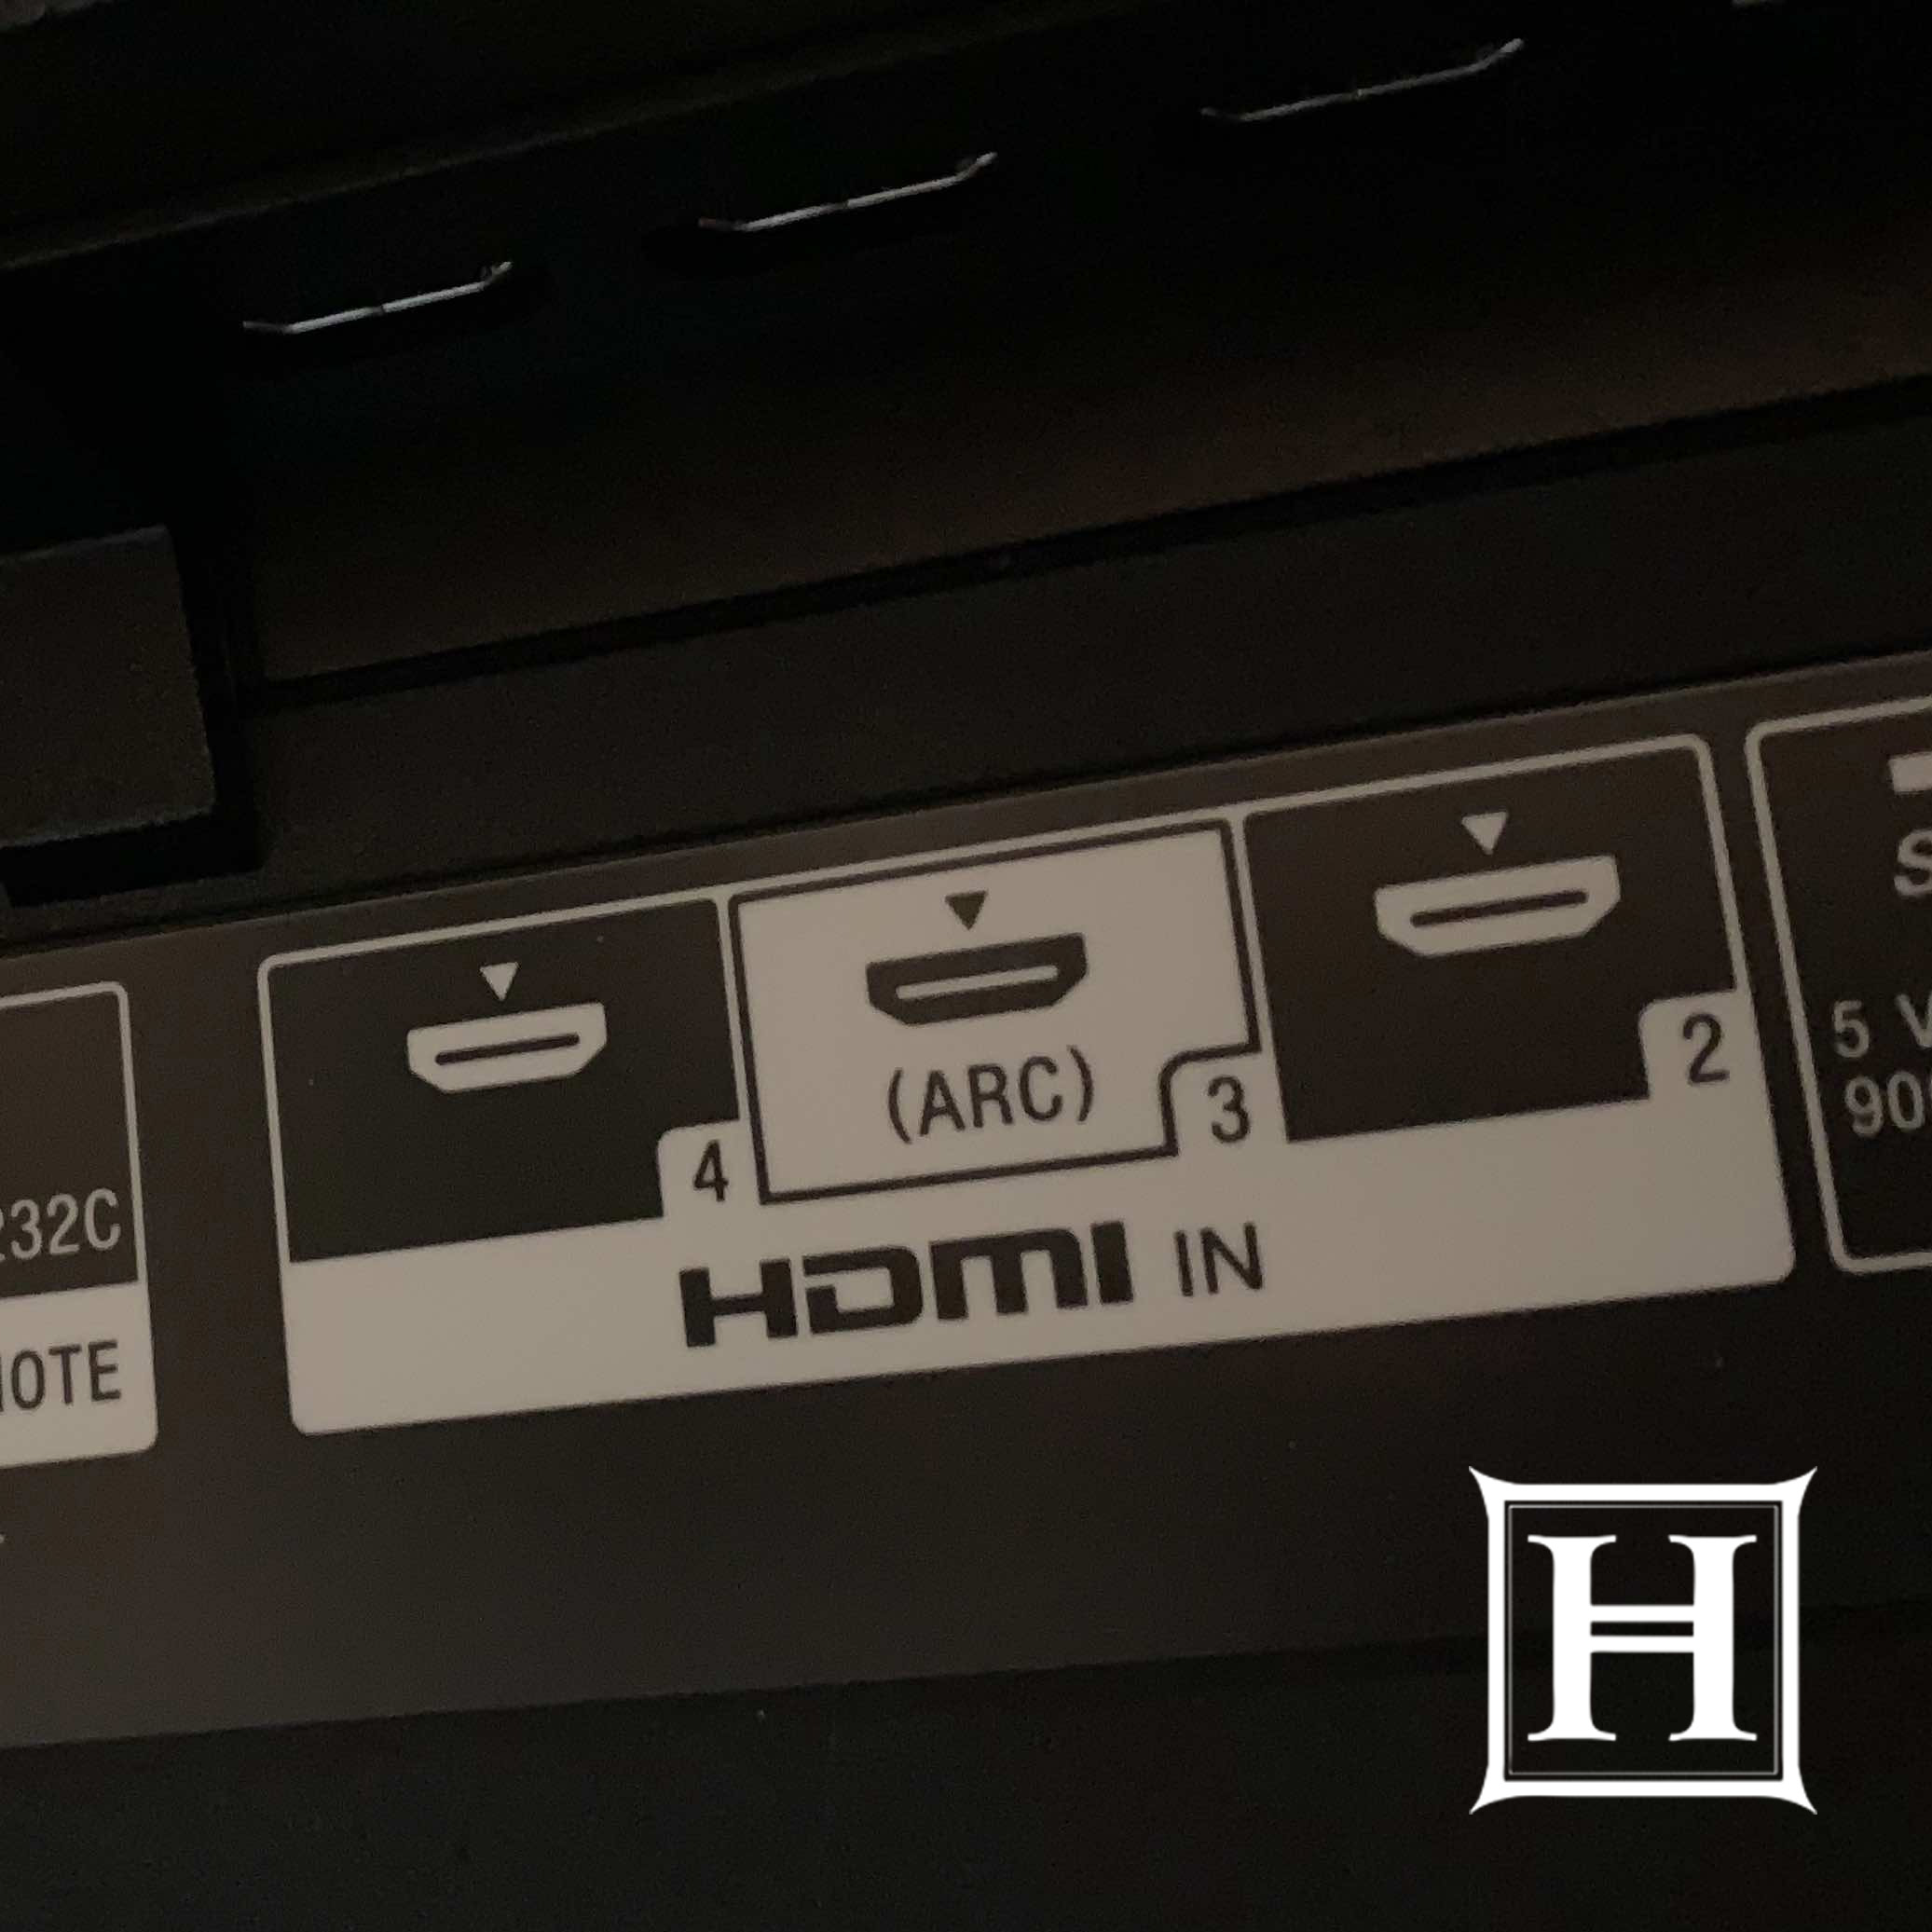 Which HDMI port should I use?